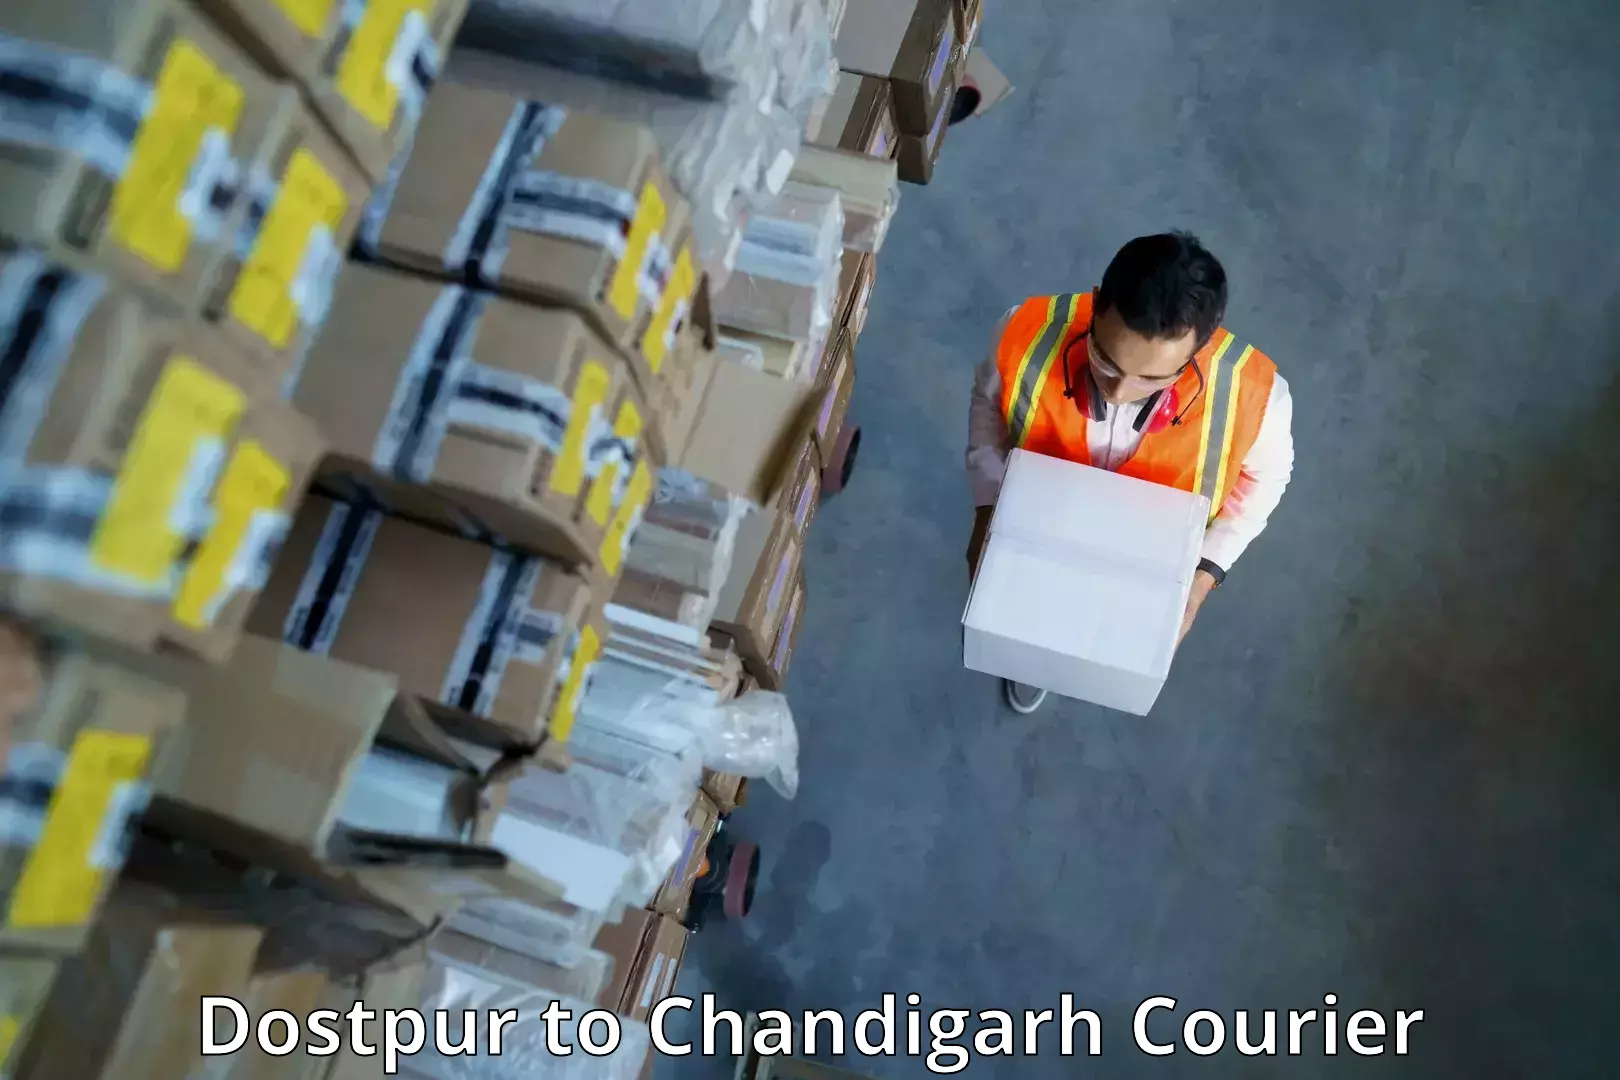 Package delivery network Dostpur to Panjab University Chandigarh